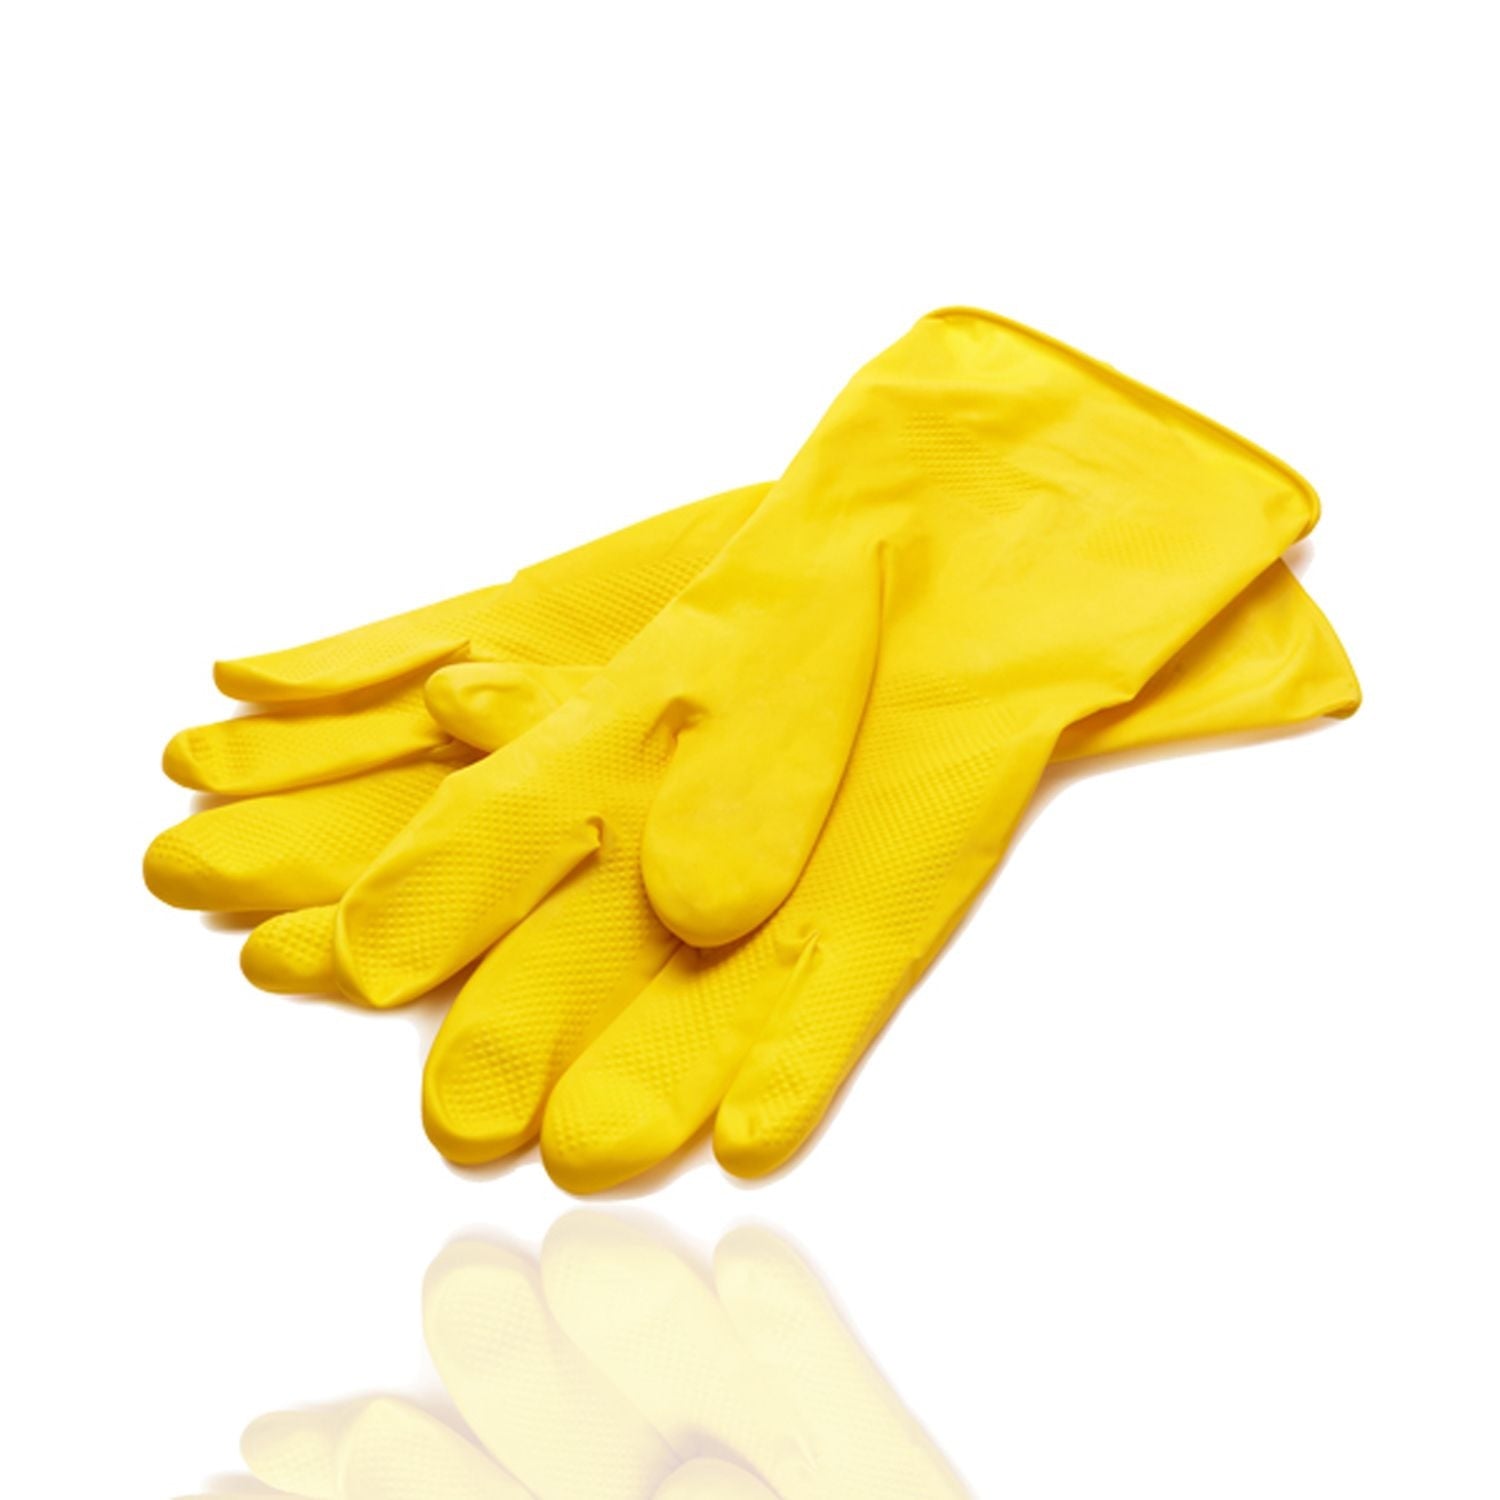 Disposable Yellow Gloves | Pack of 12 & Disposable Yellow Gloves | Large | Pack of 12